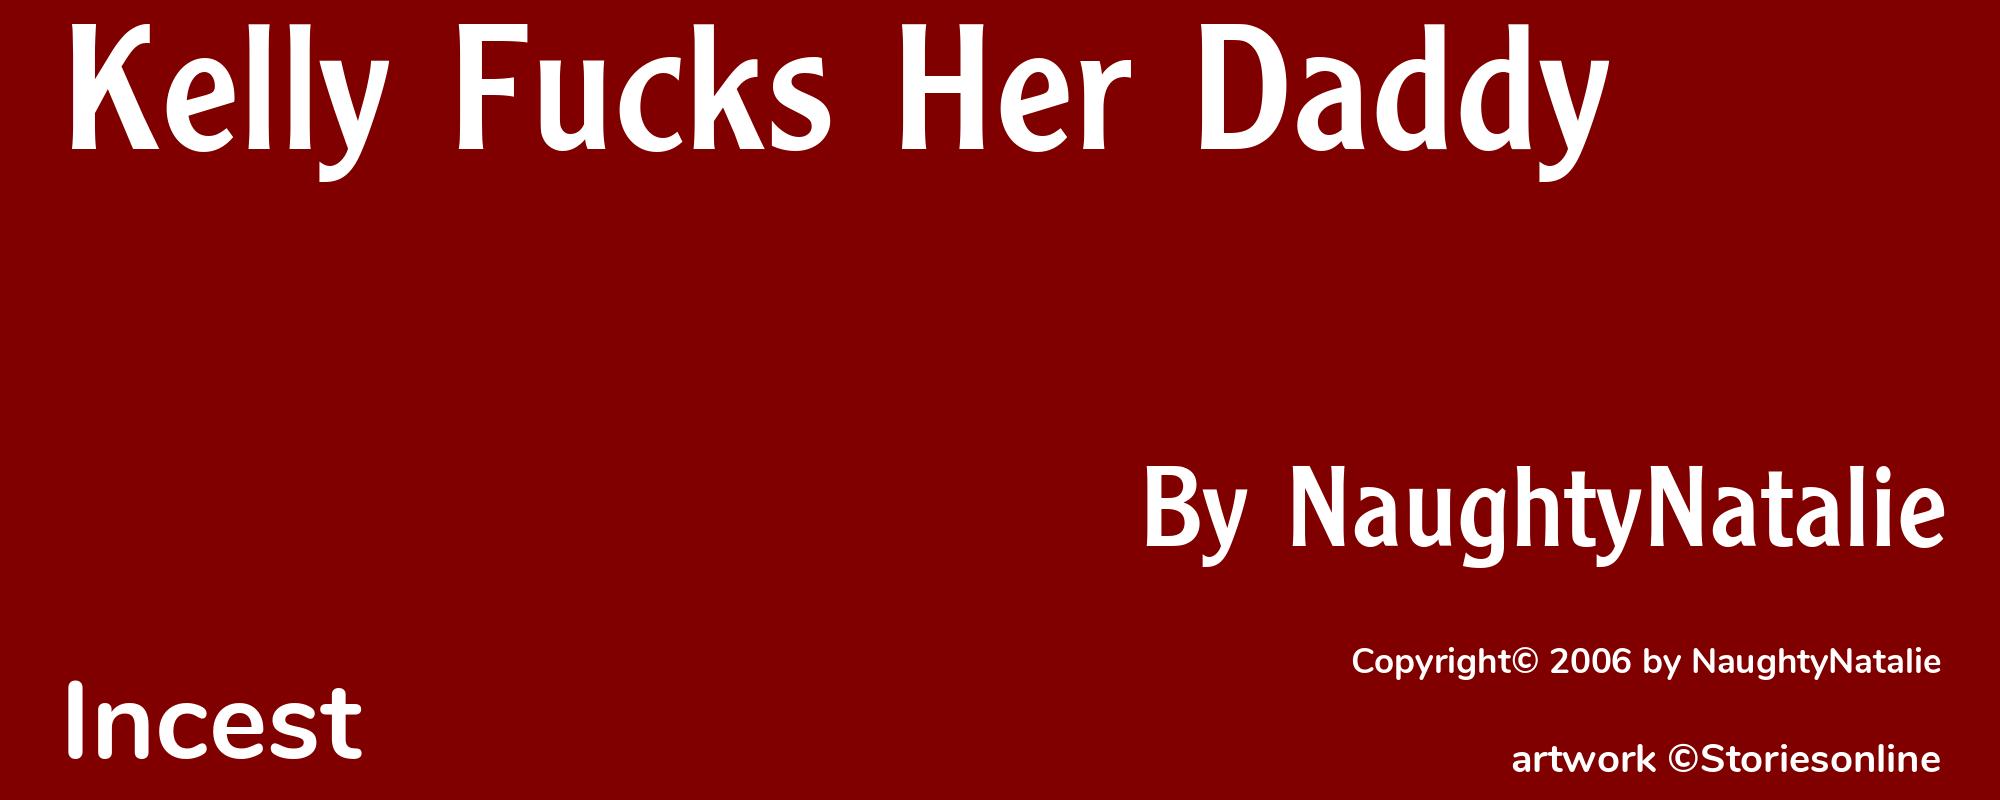 Kelly Fucks Her Daddy - Cover